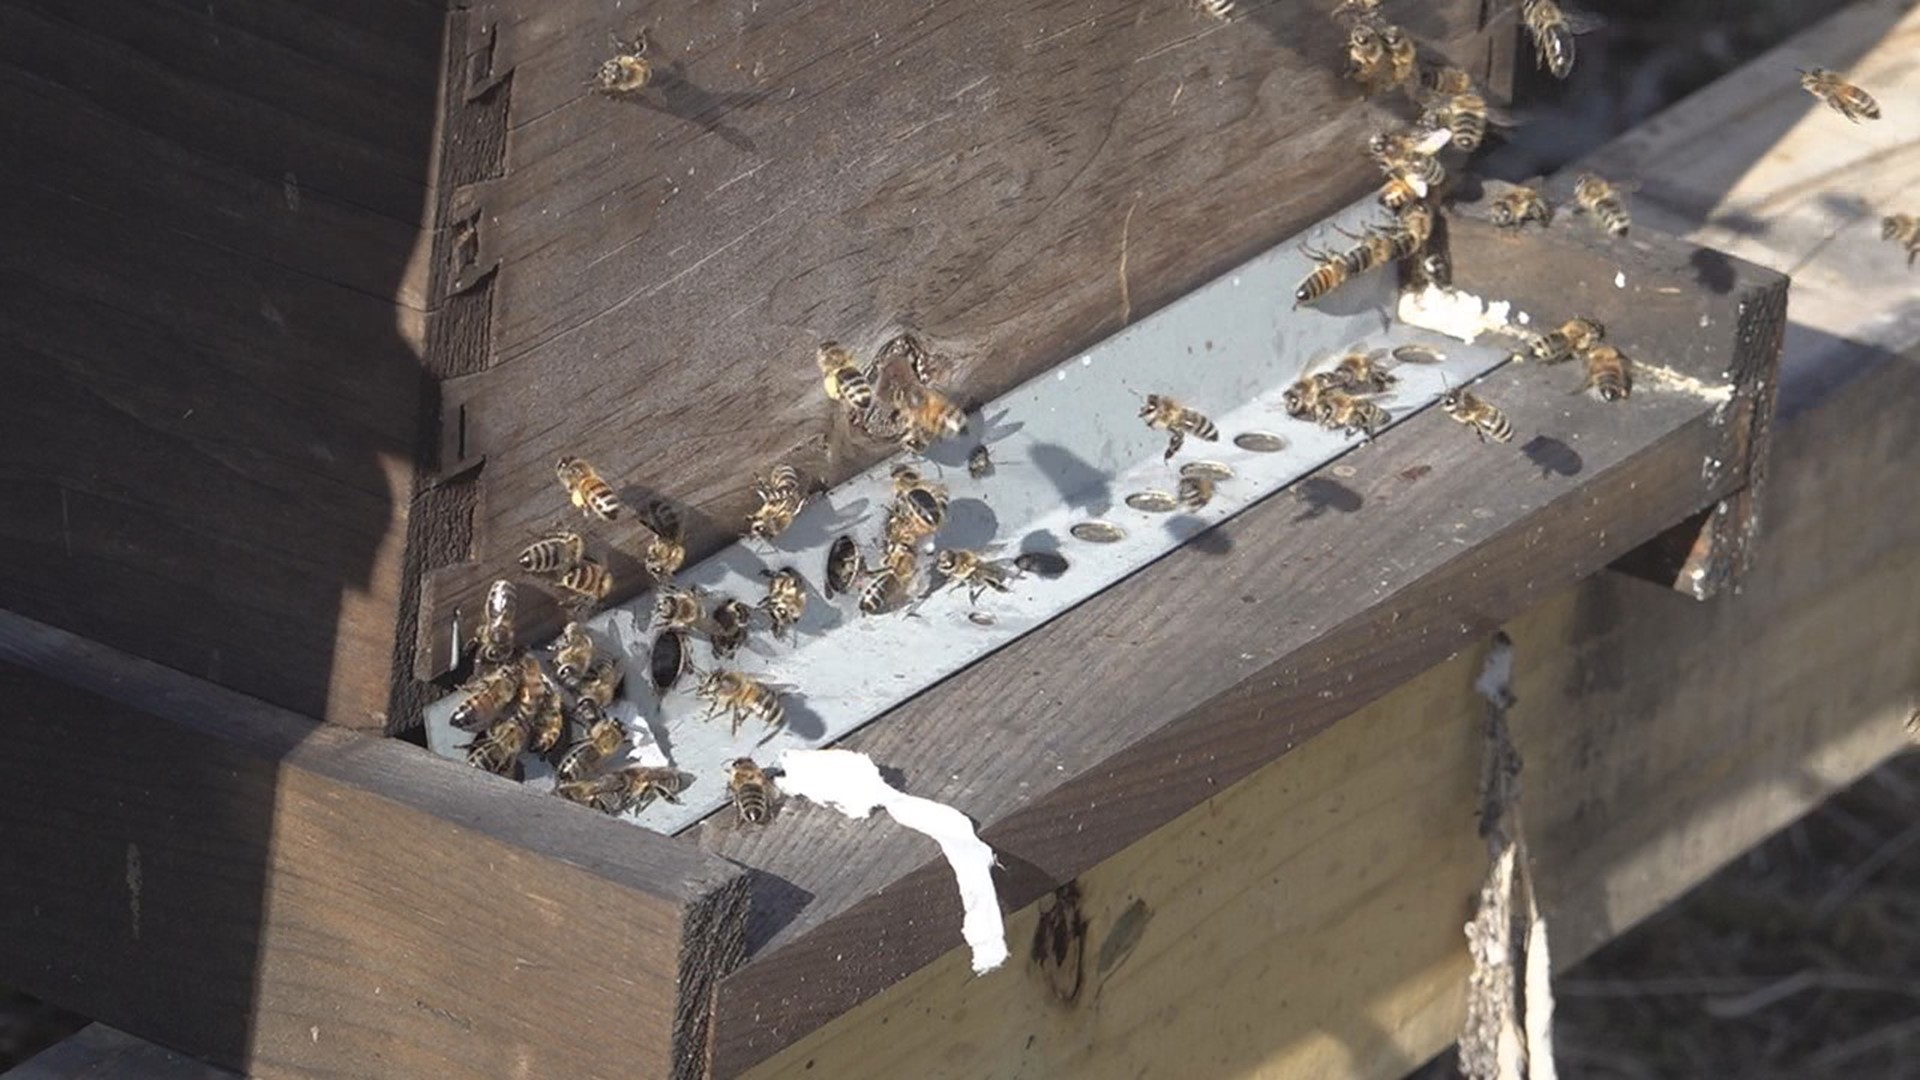 An unseasonably-warm February day tricked pollinators into thinking spring had sprung, but the winter cold isn't over. It could hurt the bee population and crops.